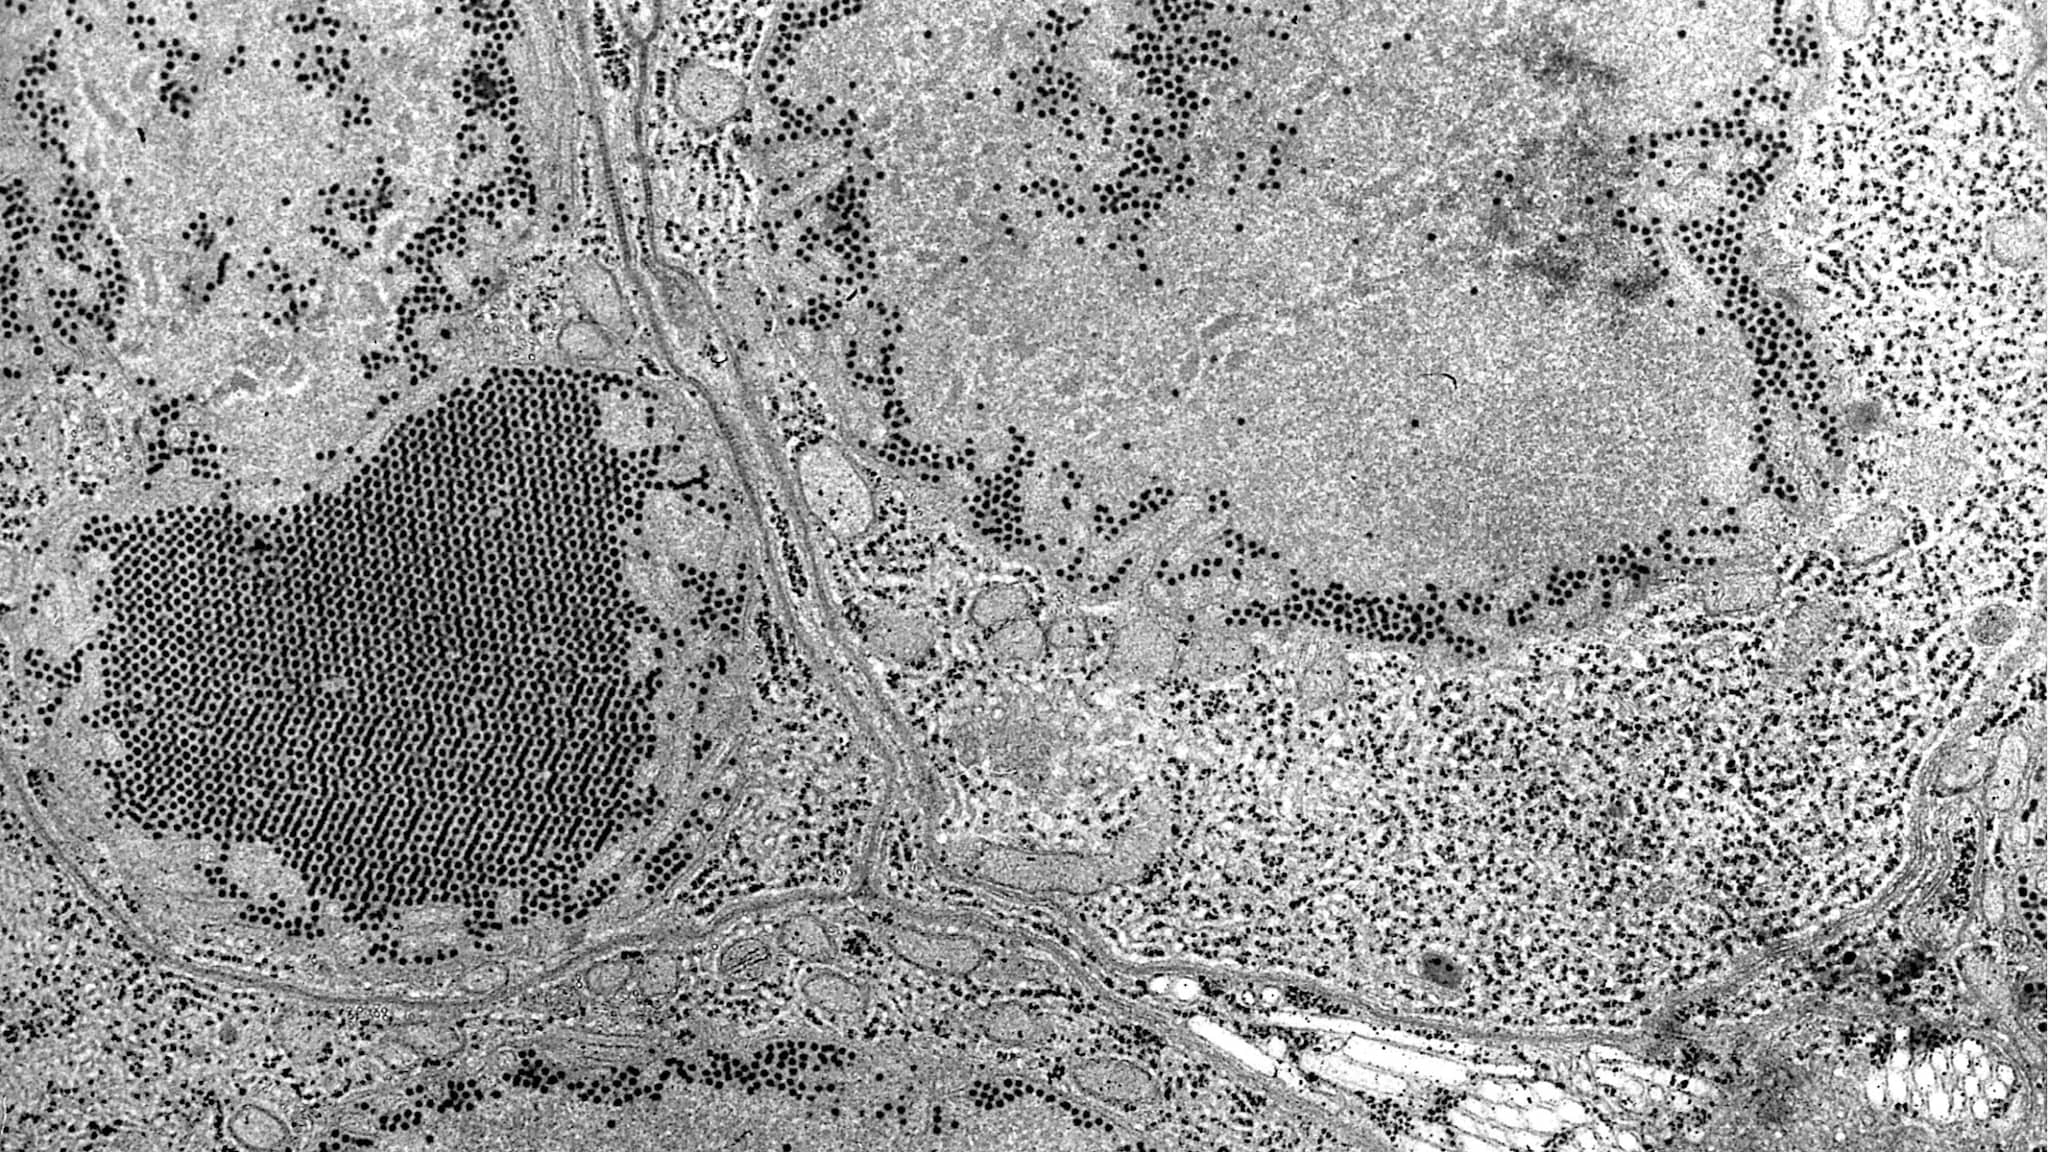 This transmission electron microscopic (TEM) image, revealed the presence of numerous St. Louis encephalitis (SLE) virions that were contained within a central nervous system tissue sample. SLE virus is a member of the genus Flavivirus, family Flaviviridae.